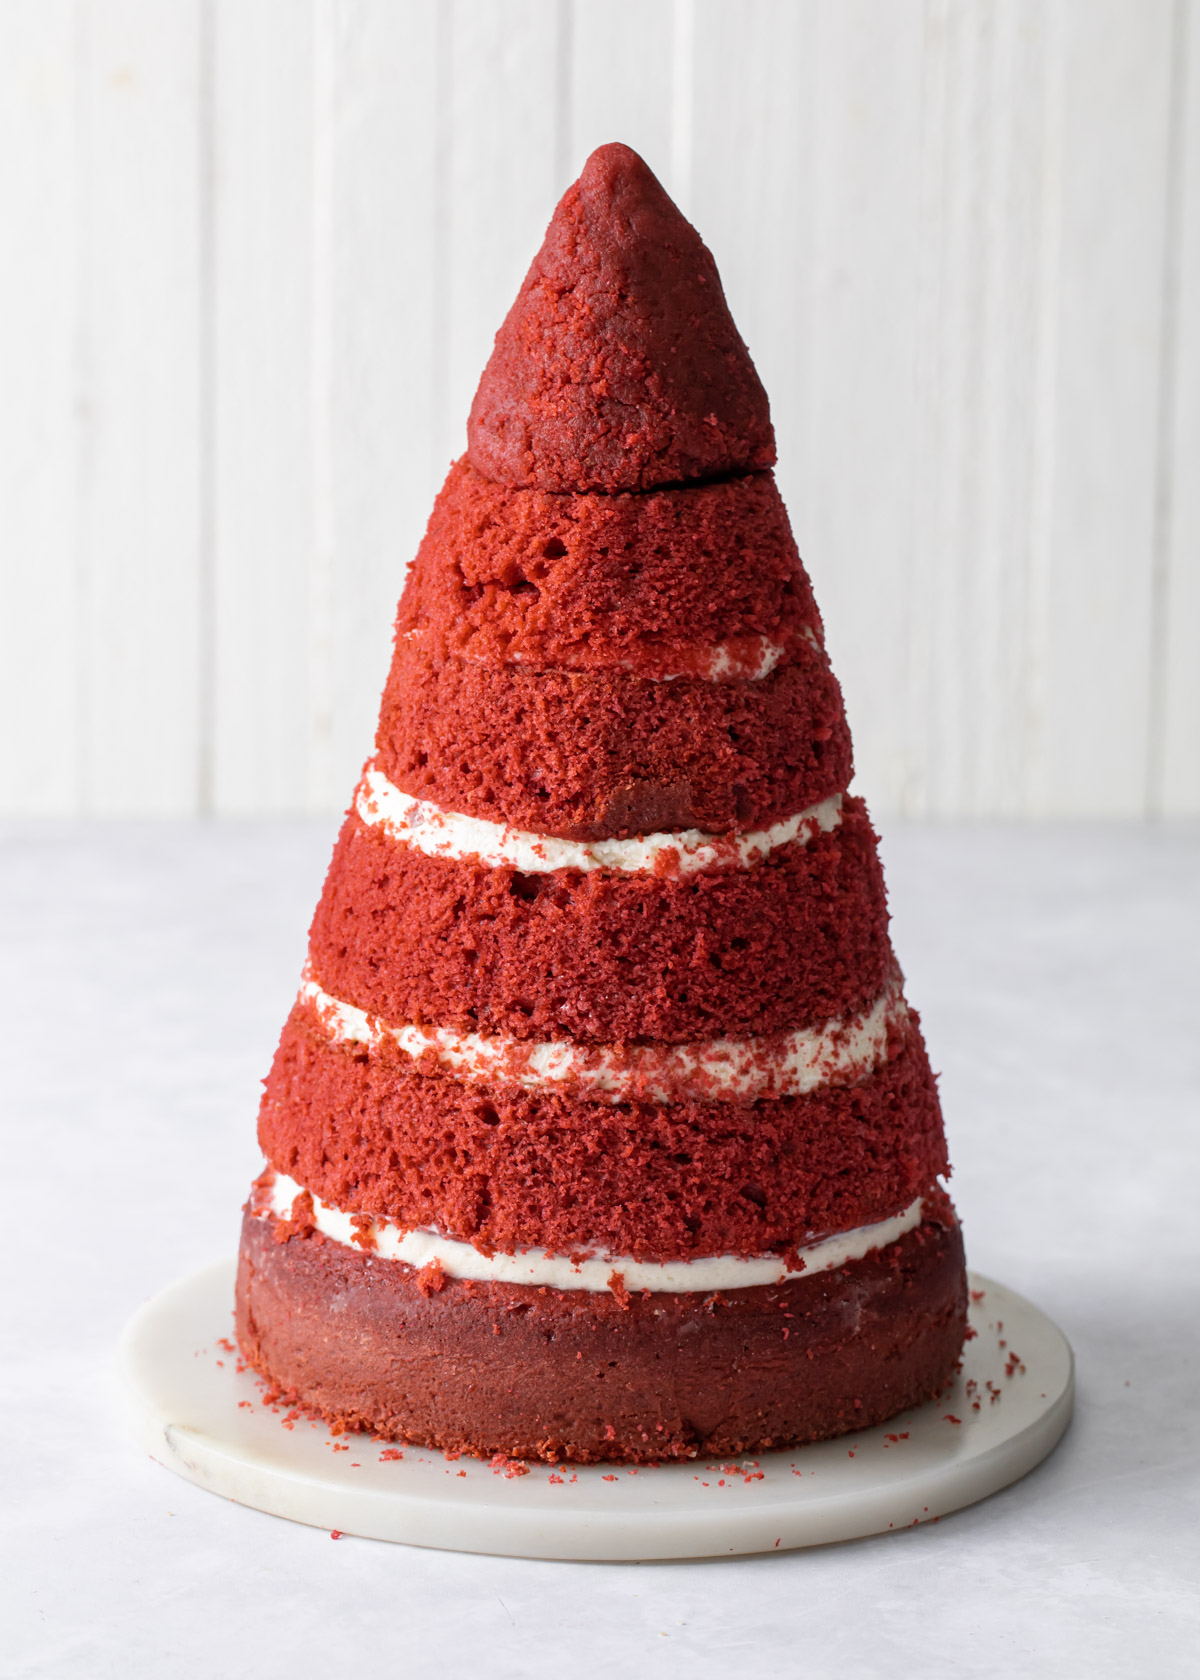 Carved cake layers to form the shape of a Christmas tree